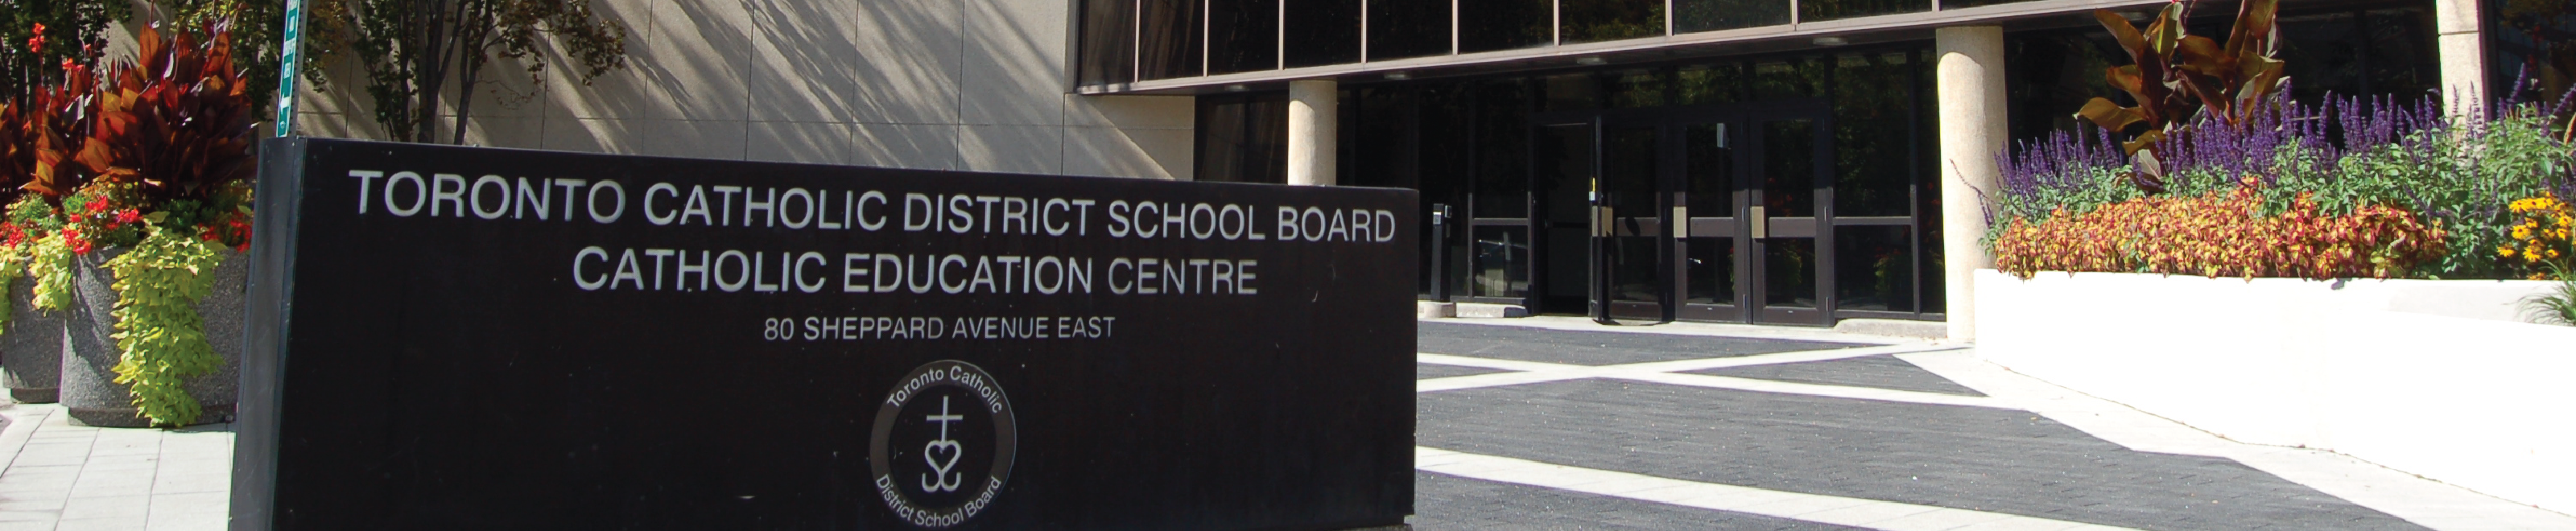 Building sign in front of building for Toronto Catholic District School Board's Catholic Education Centre.